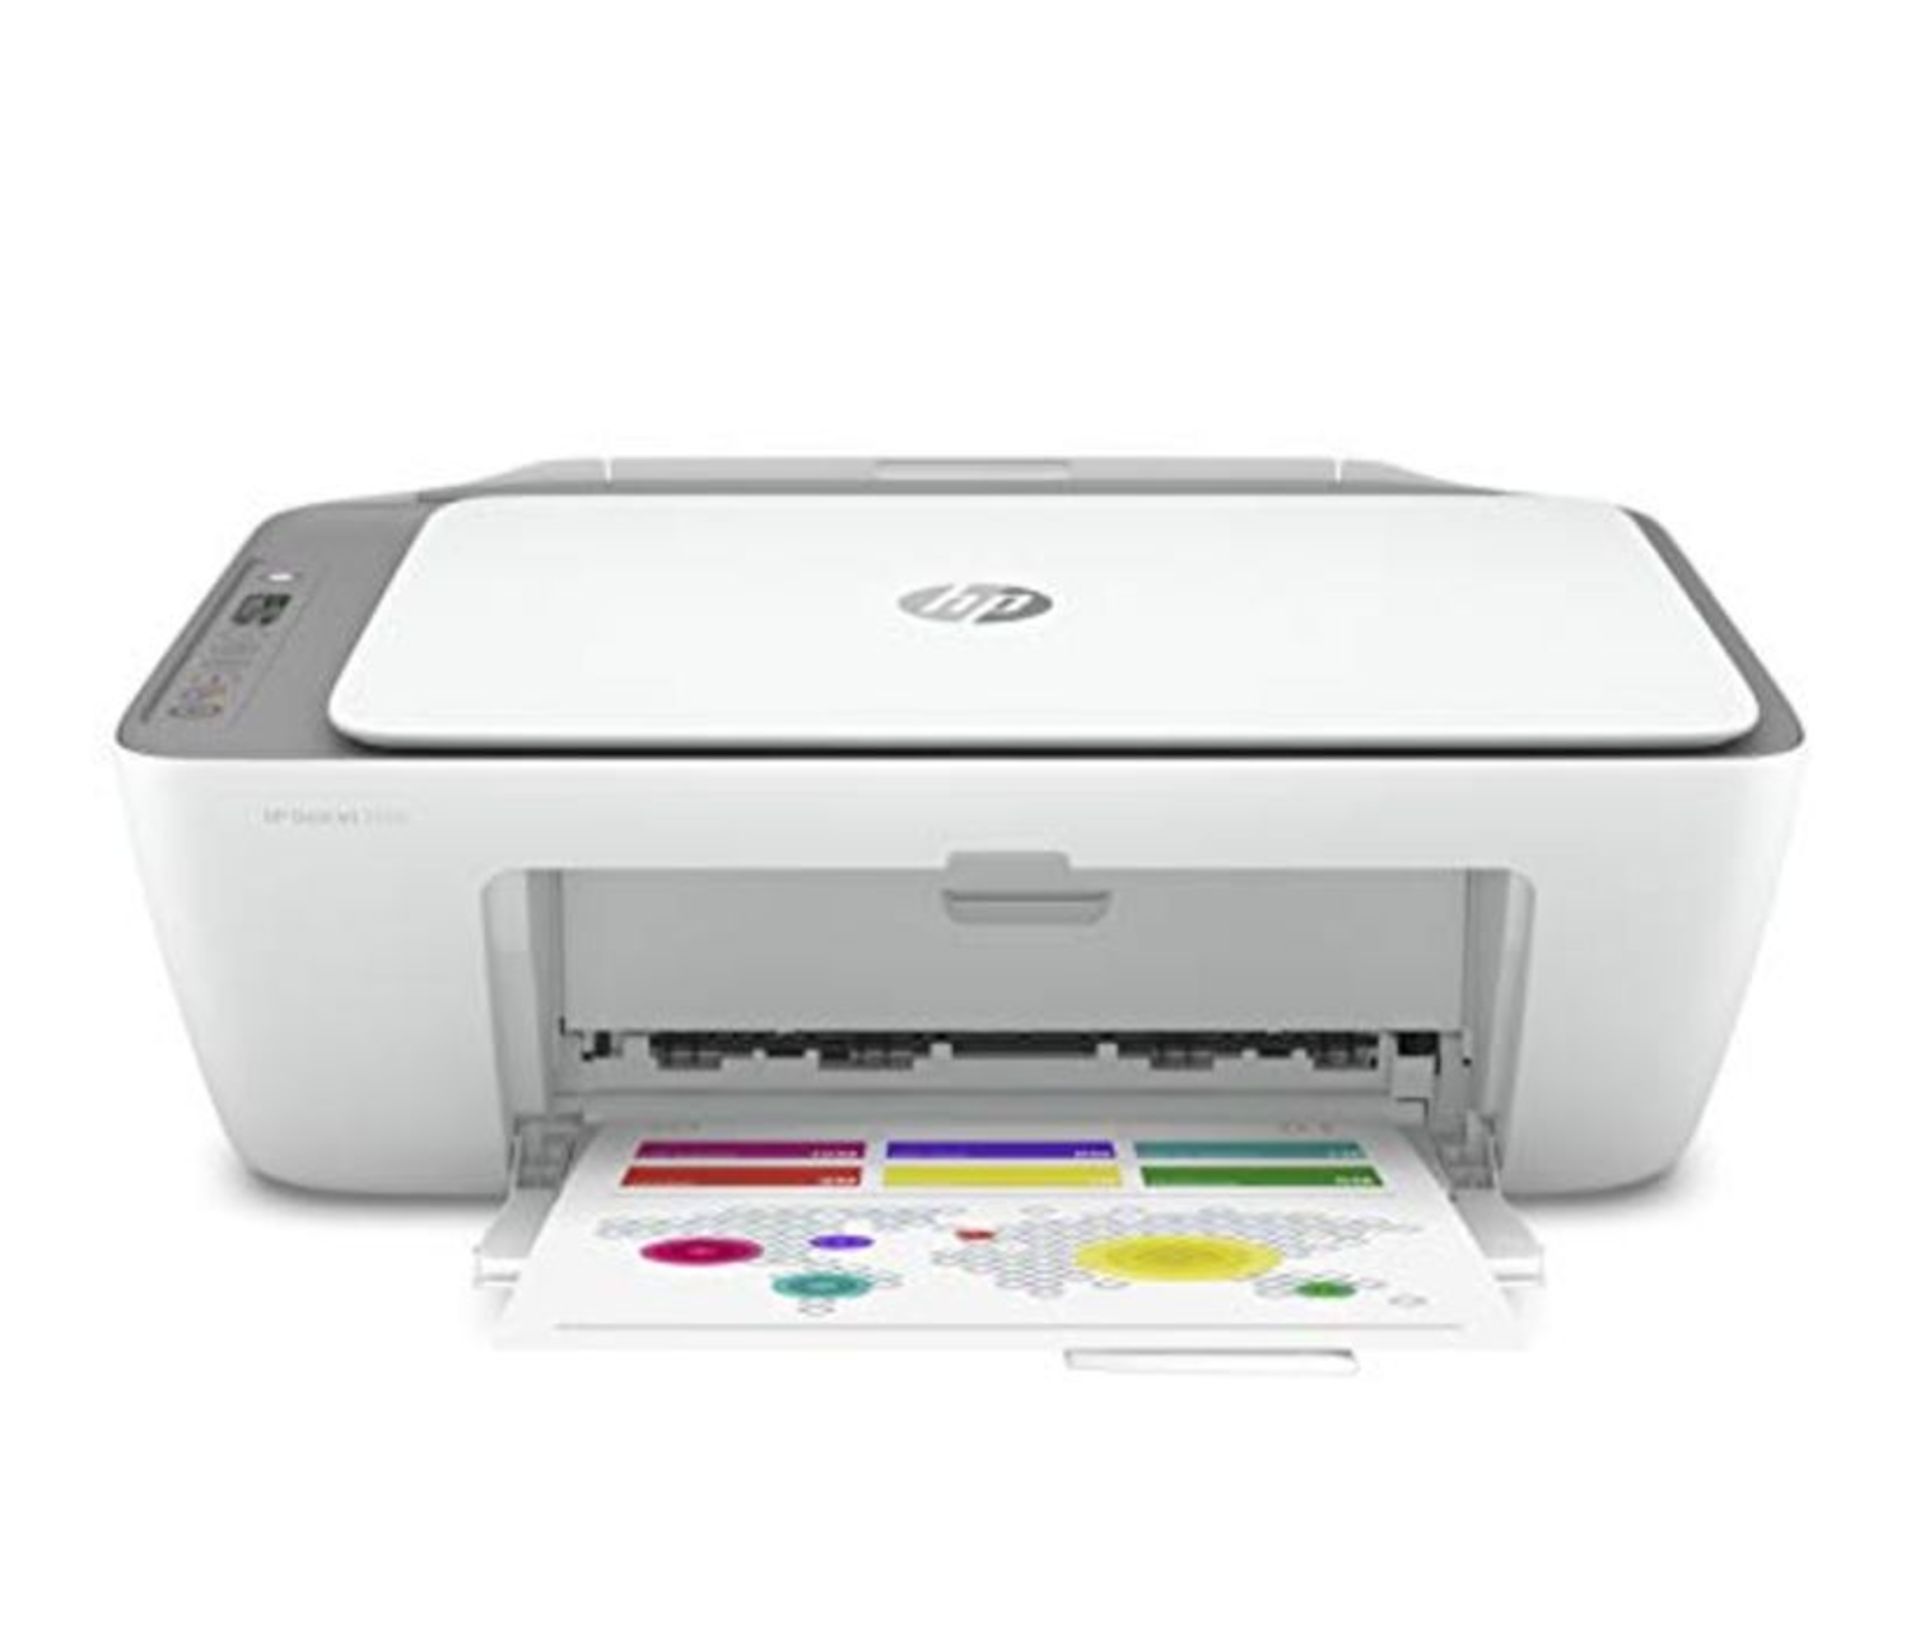 HP DeskJet 2720 All-in-One Printer with Wireless Printing, Instant Ink with 2 Months T